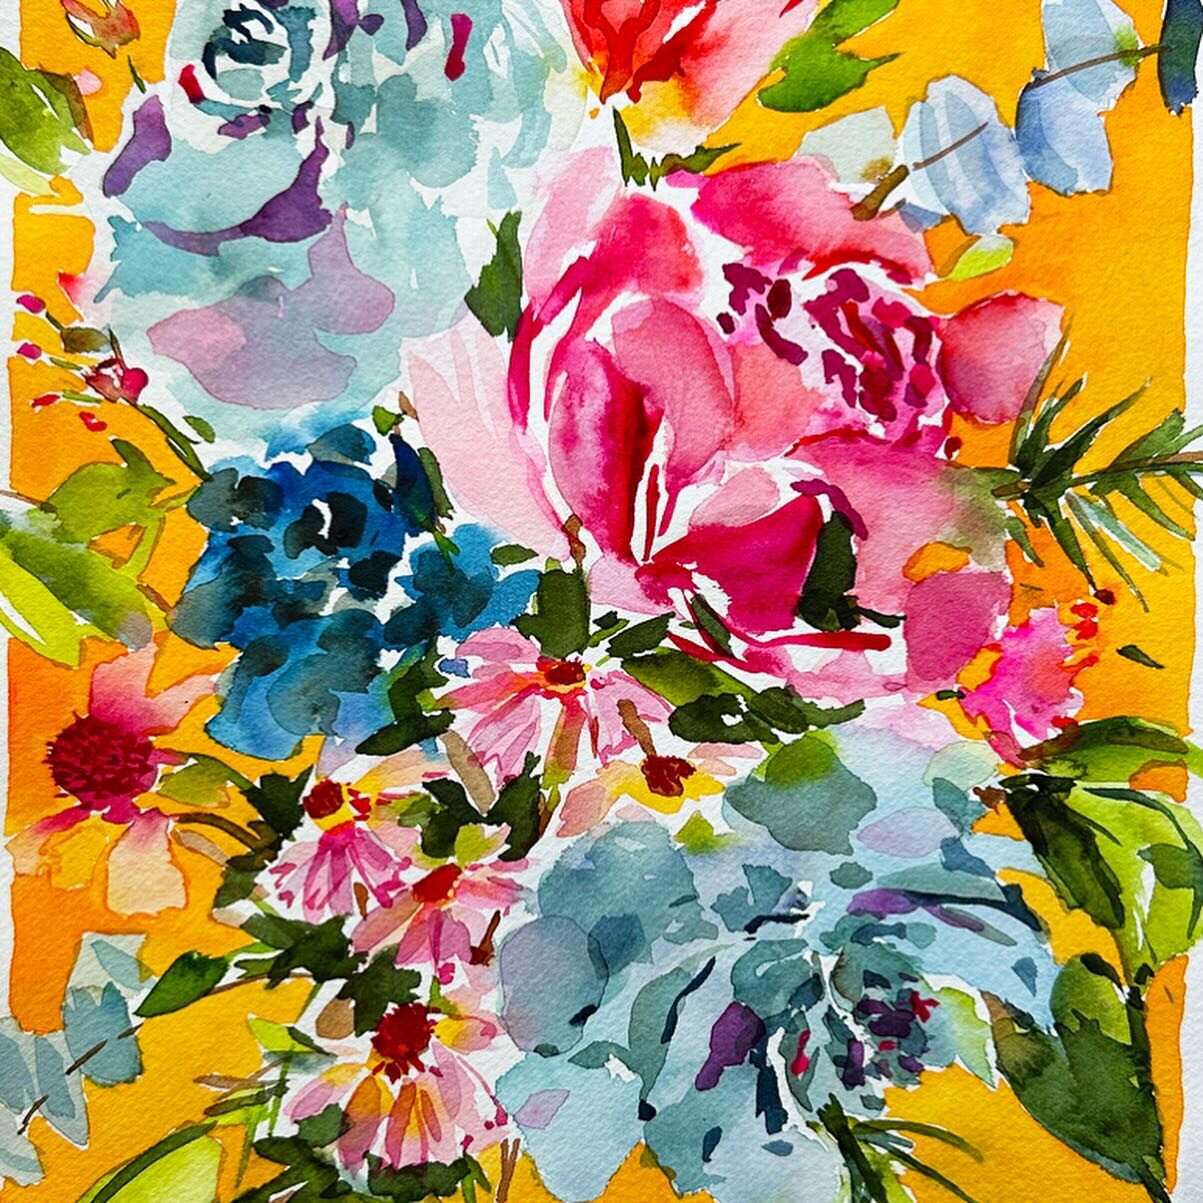 Happy Valentine&rsquo;s Day! 💐Today @tokarestate is our lovely recipient of colourful watercolour florals by @crystaltanart . Crystal is our latest artist on display at Tokar as part of our YAVA Out &amp; About wineries program.

When you pop into o